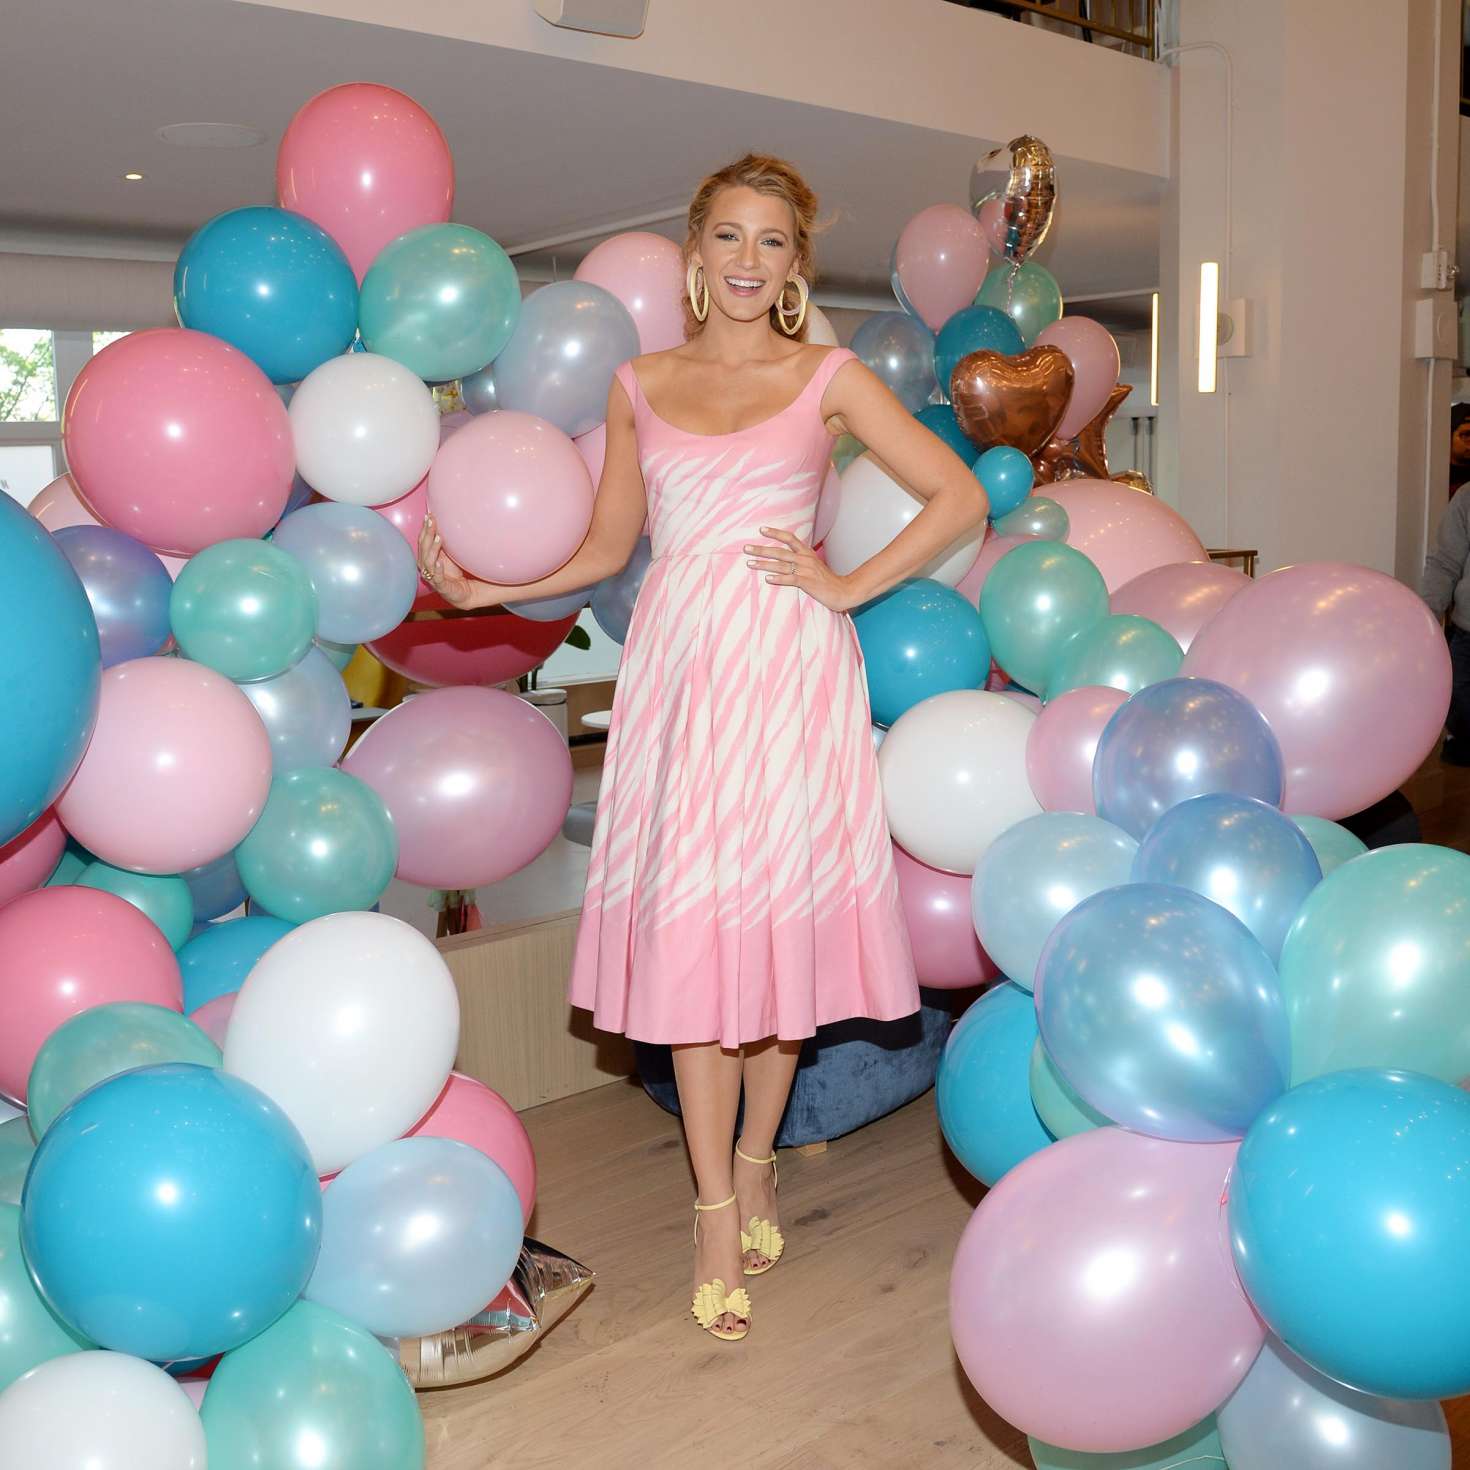 Blake Lively â€“ Baby2Baby Motherâ€™s Day Celebration in Brooklyn